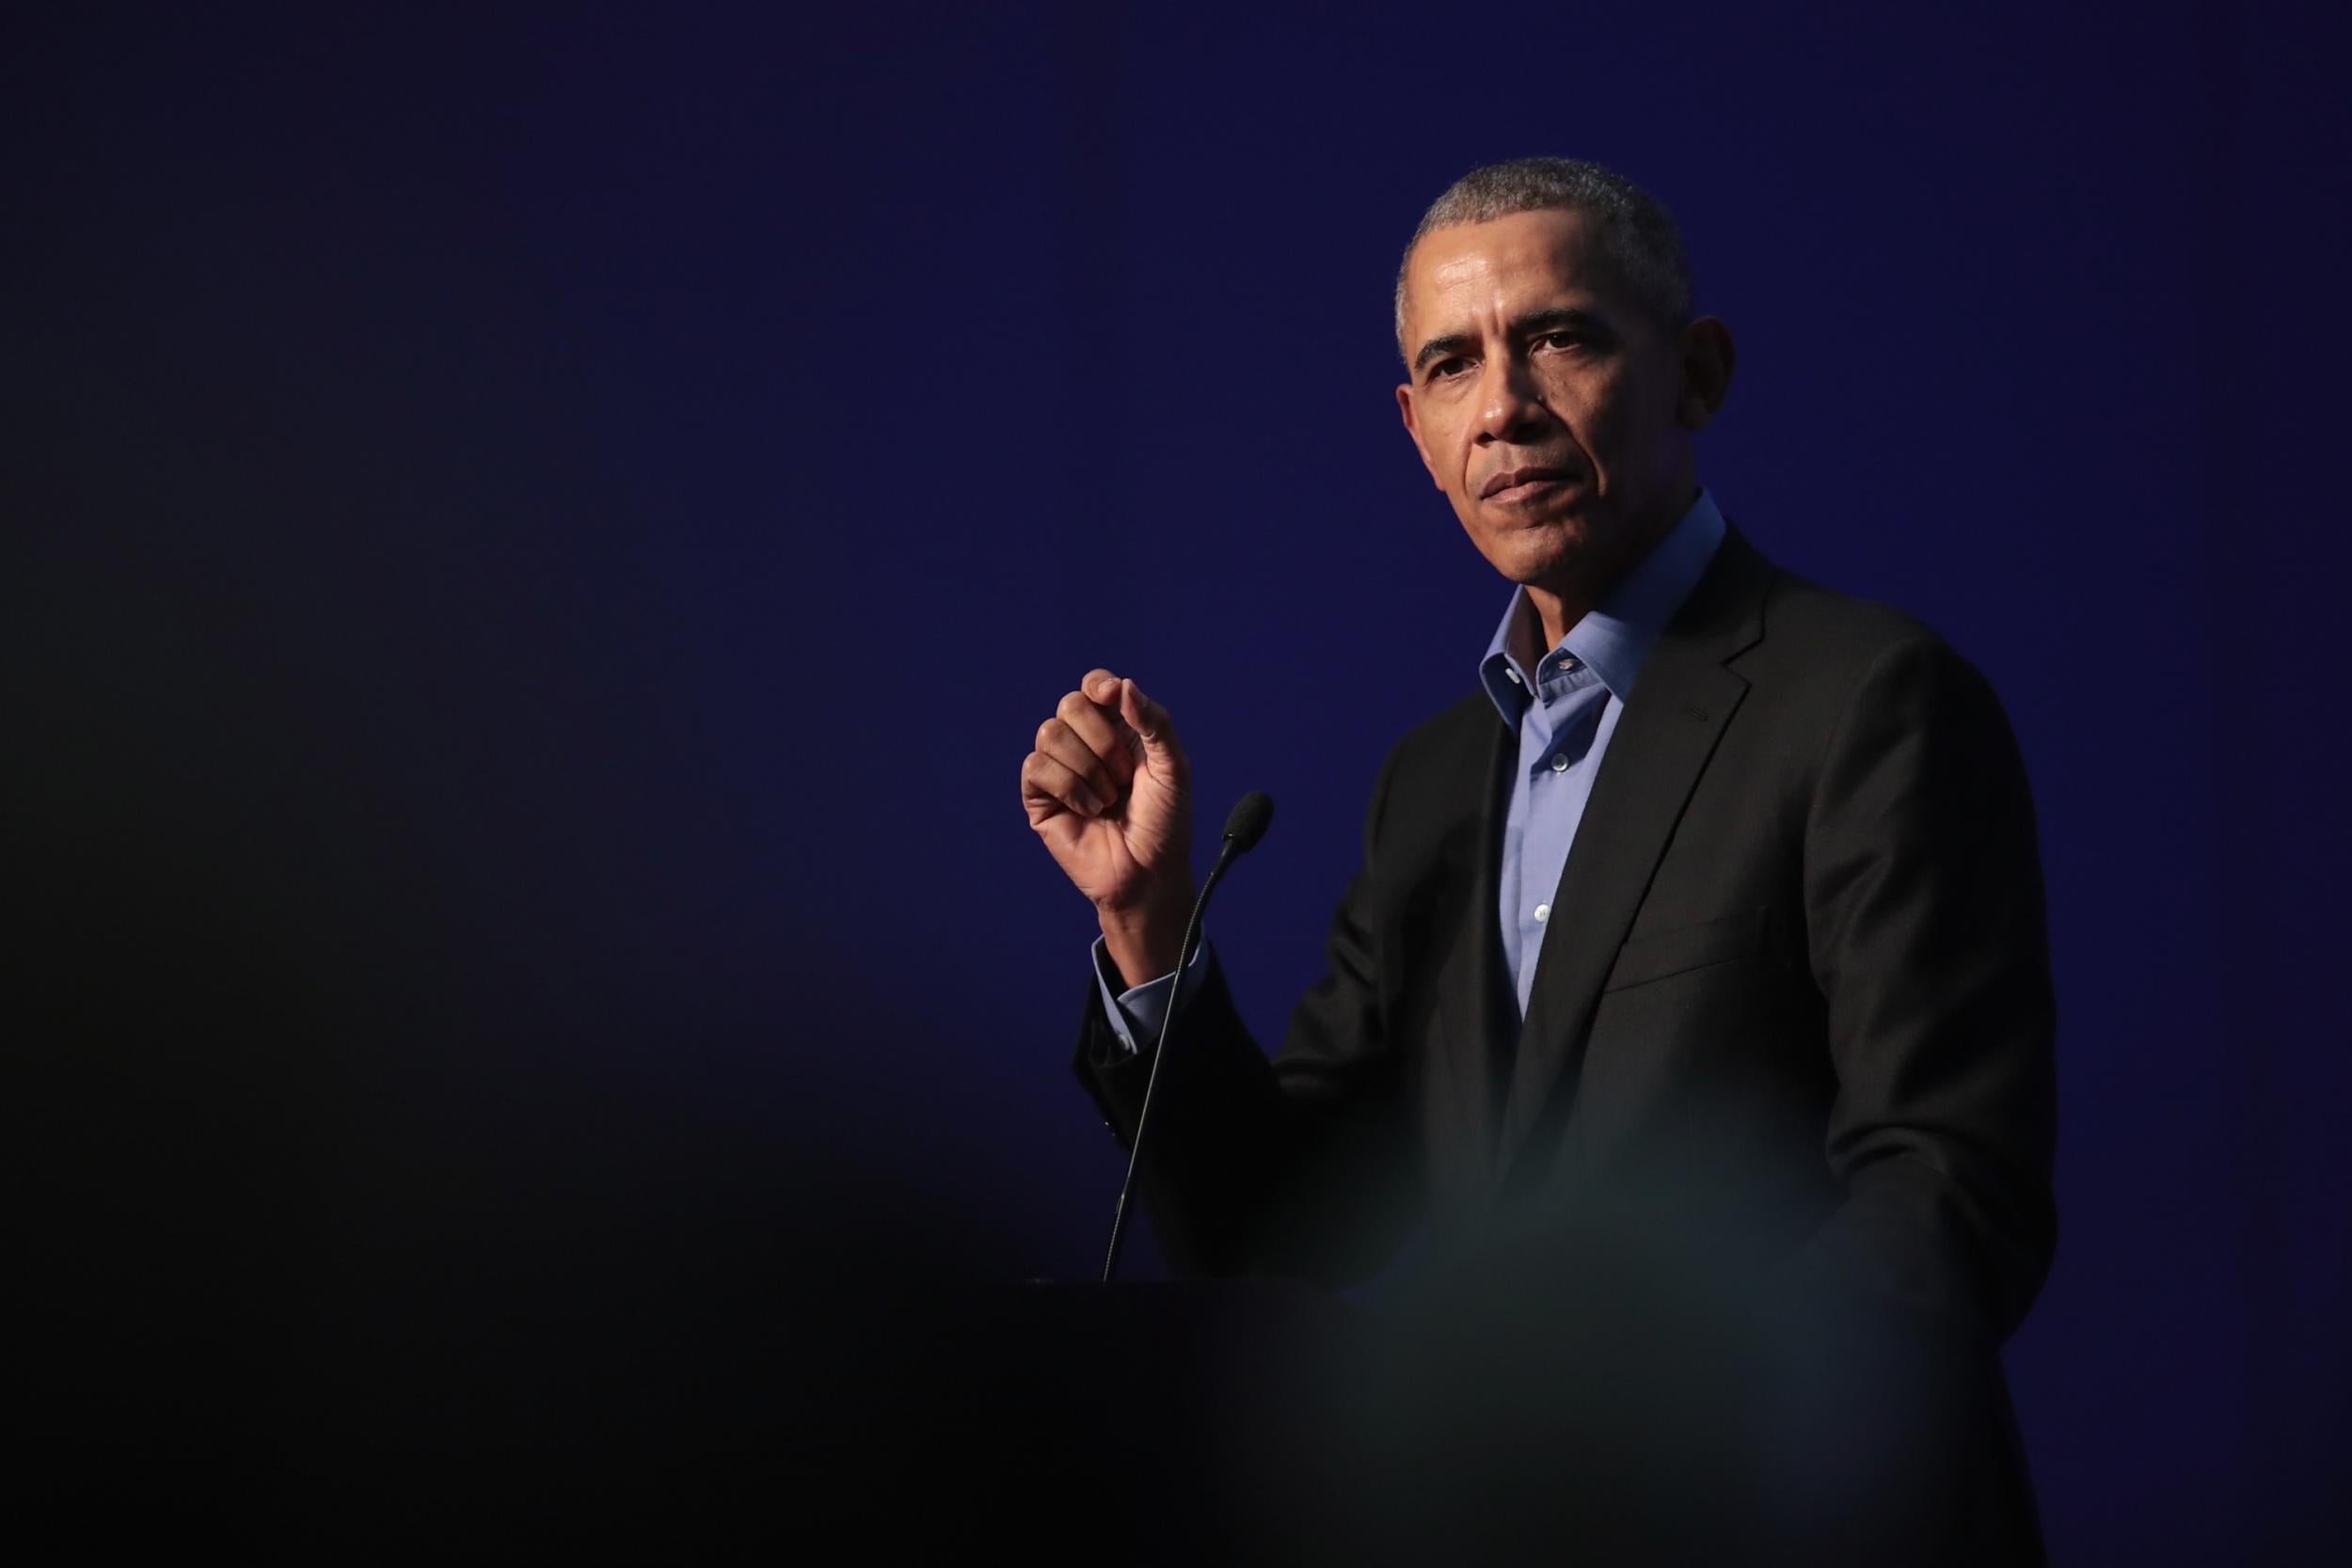 Former president Barack Obama speaks to a gathering of more than 50 mayors and other guests during the North American Climate Summit